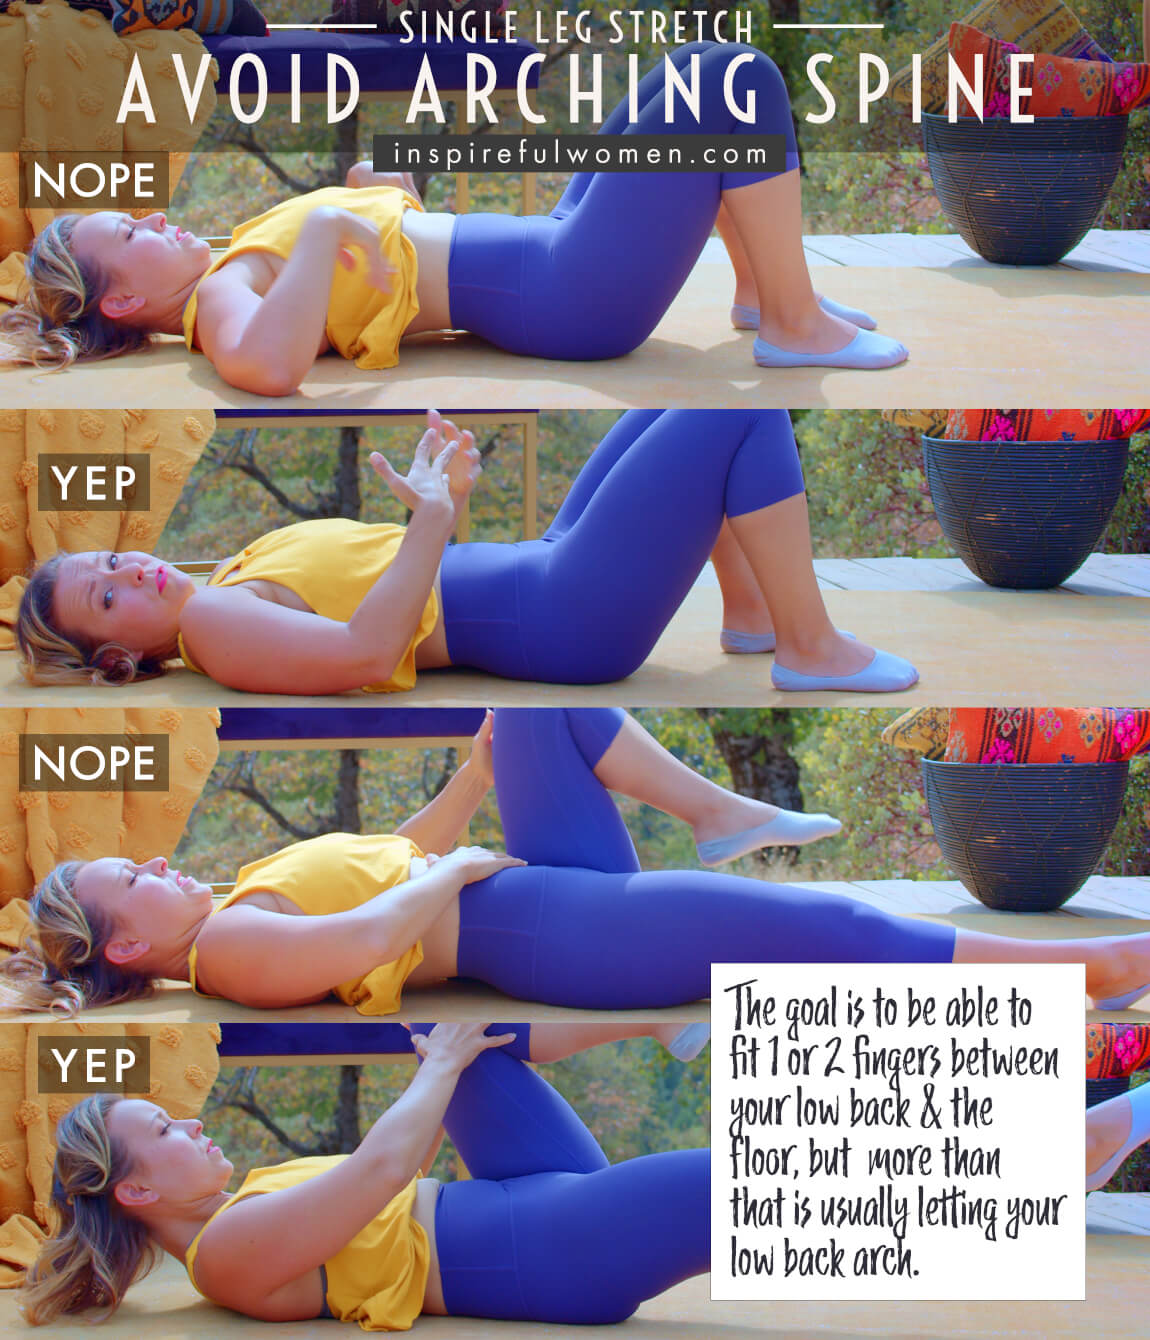 avoid-arching-spine-single-leg-stretch-pilates-core-exercise-proper-form